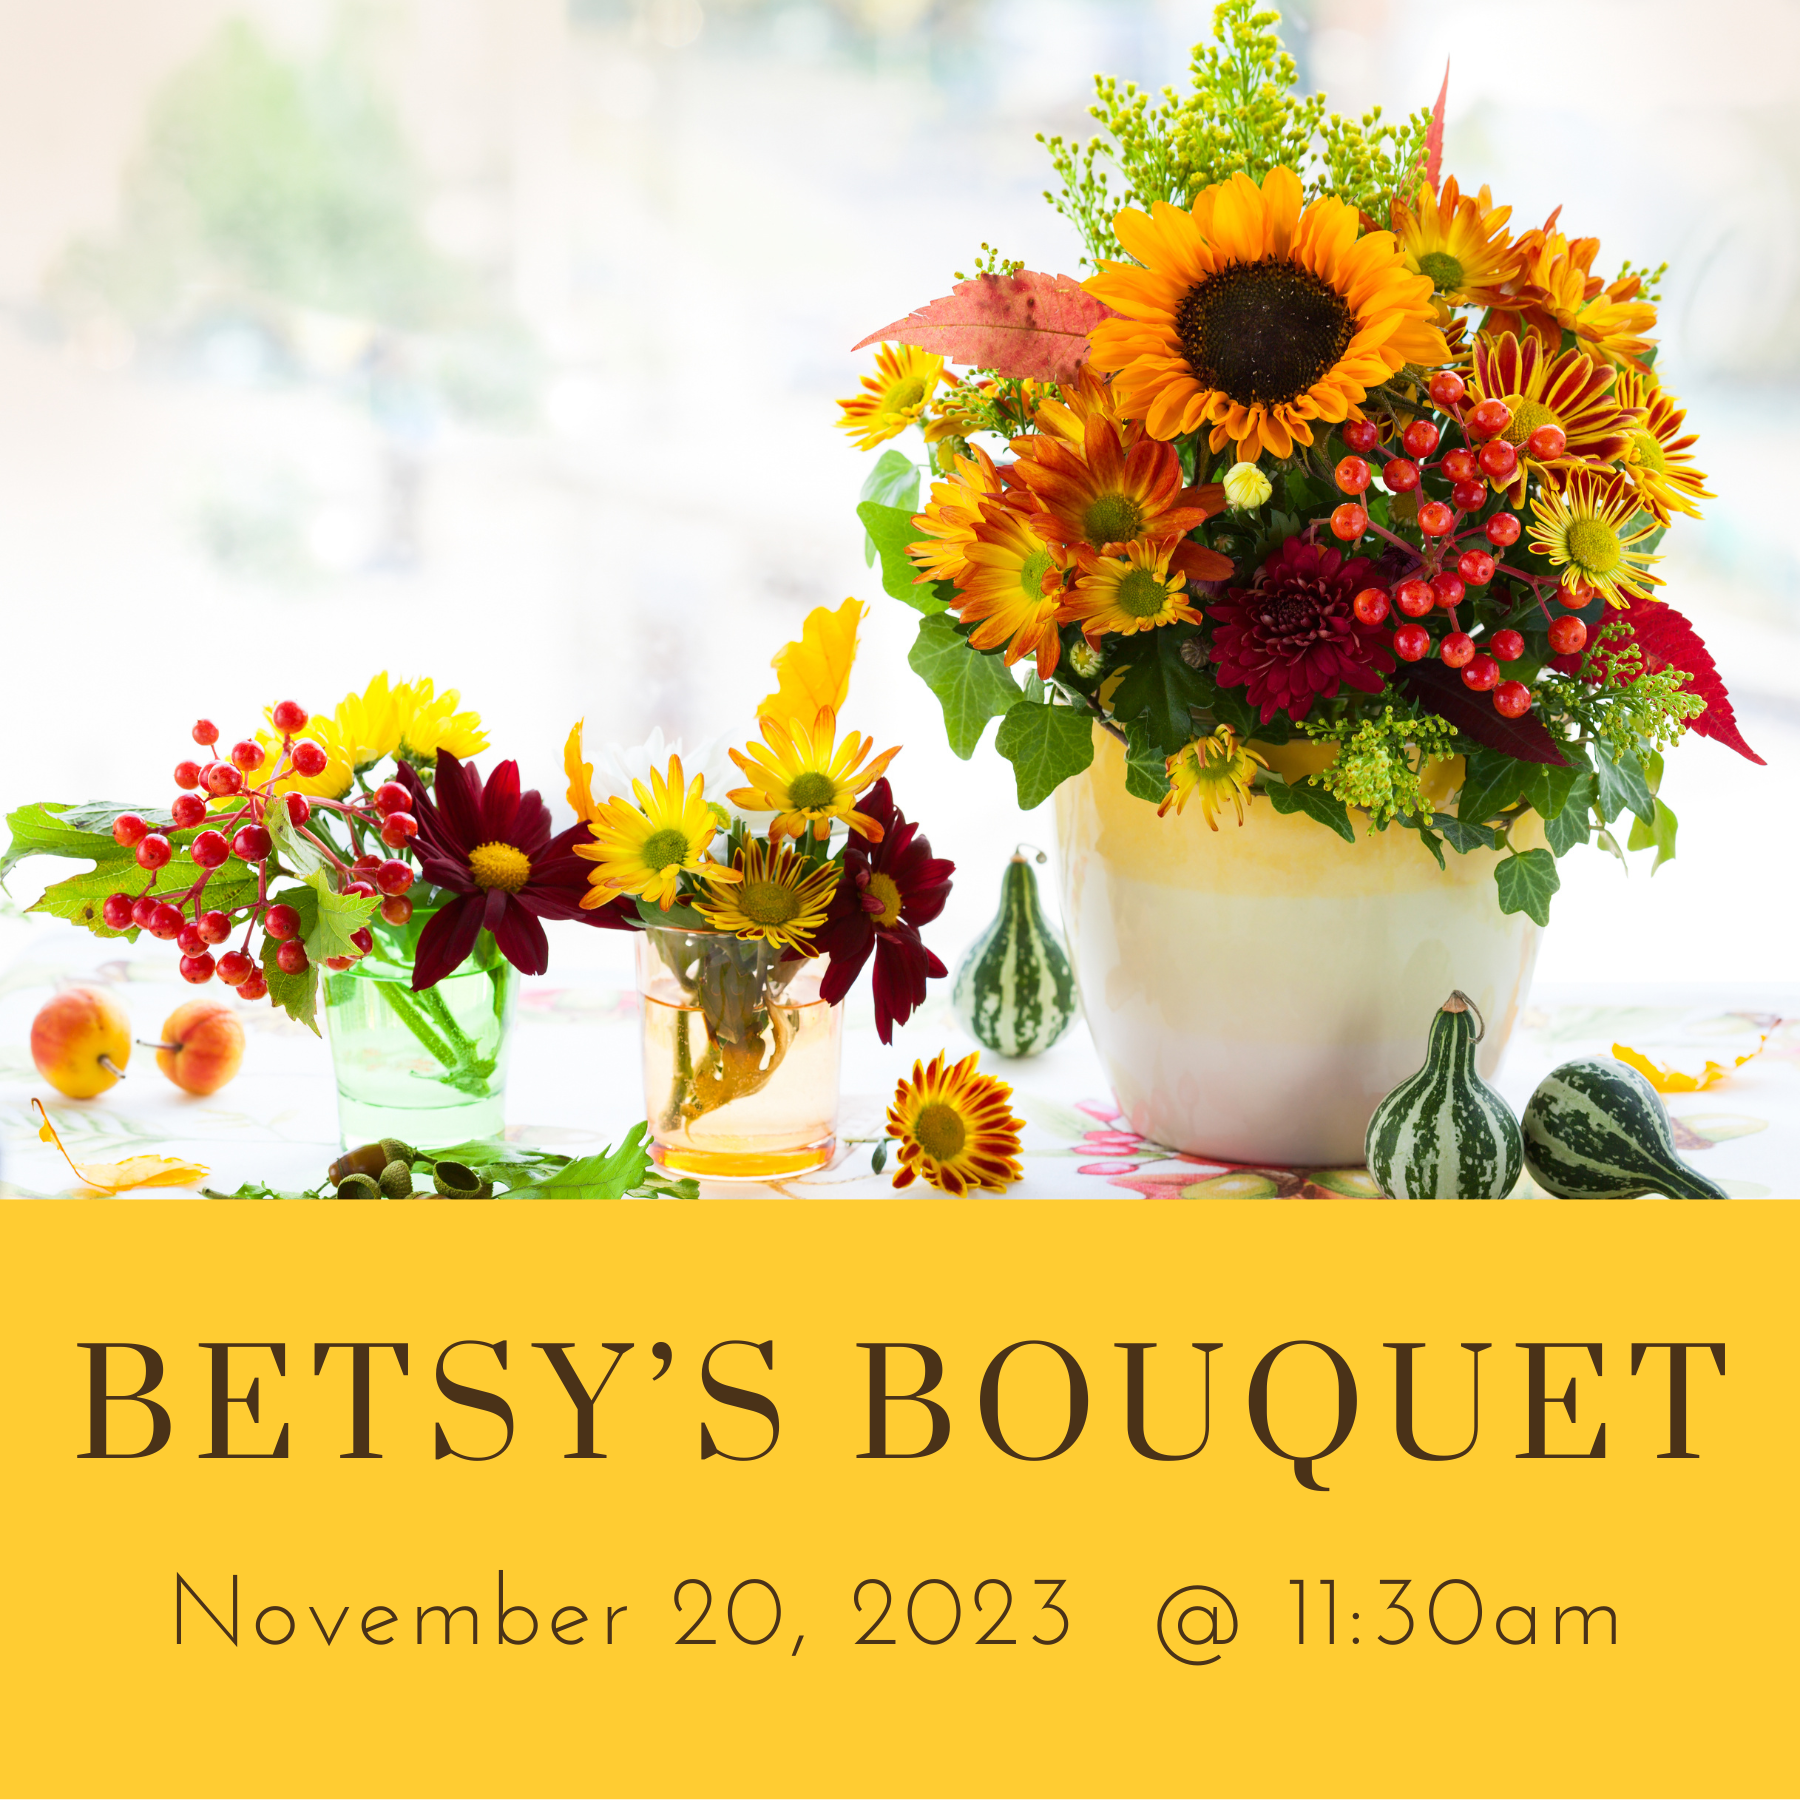 Betsy's Bouquet